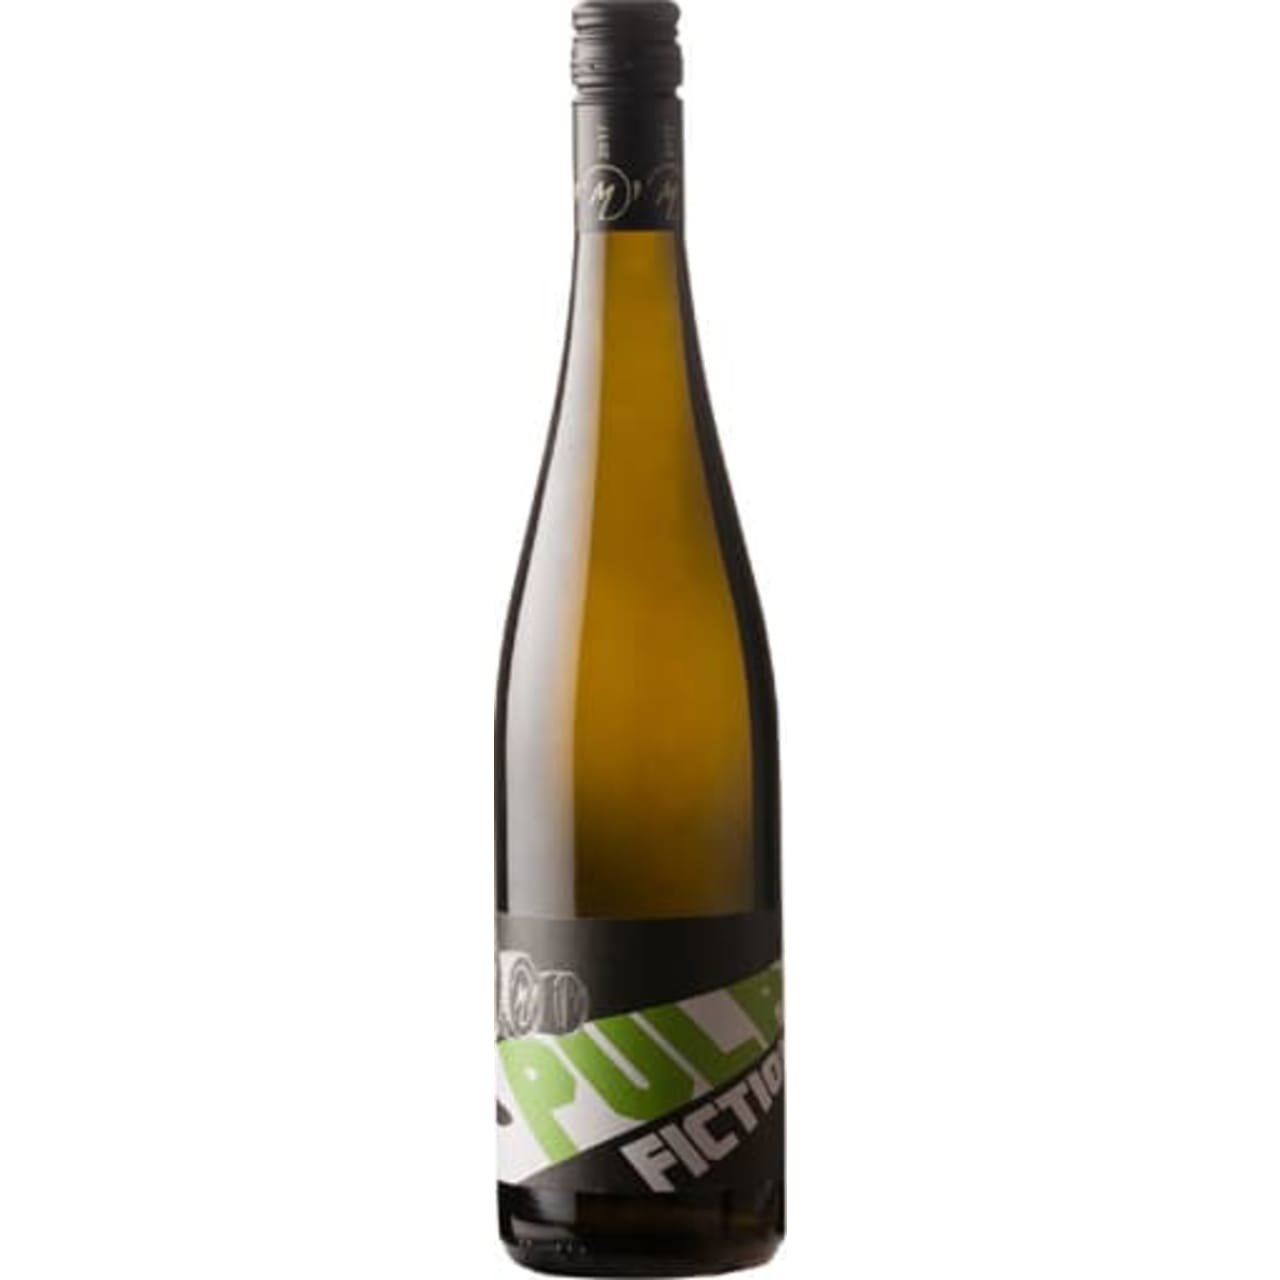 A beguiling nose, full of freshness, combining the floral aromatics of Riesling with the classic white pepper notes of Grüner Veltliner with green apple and pear.